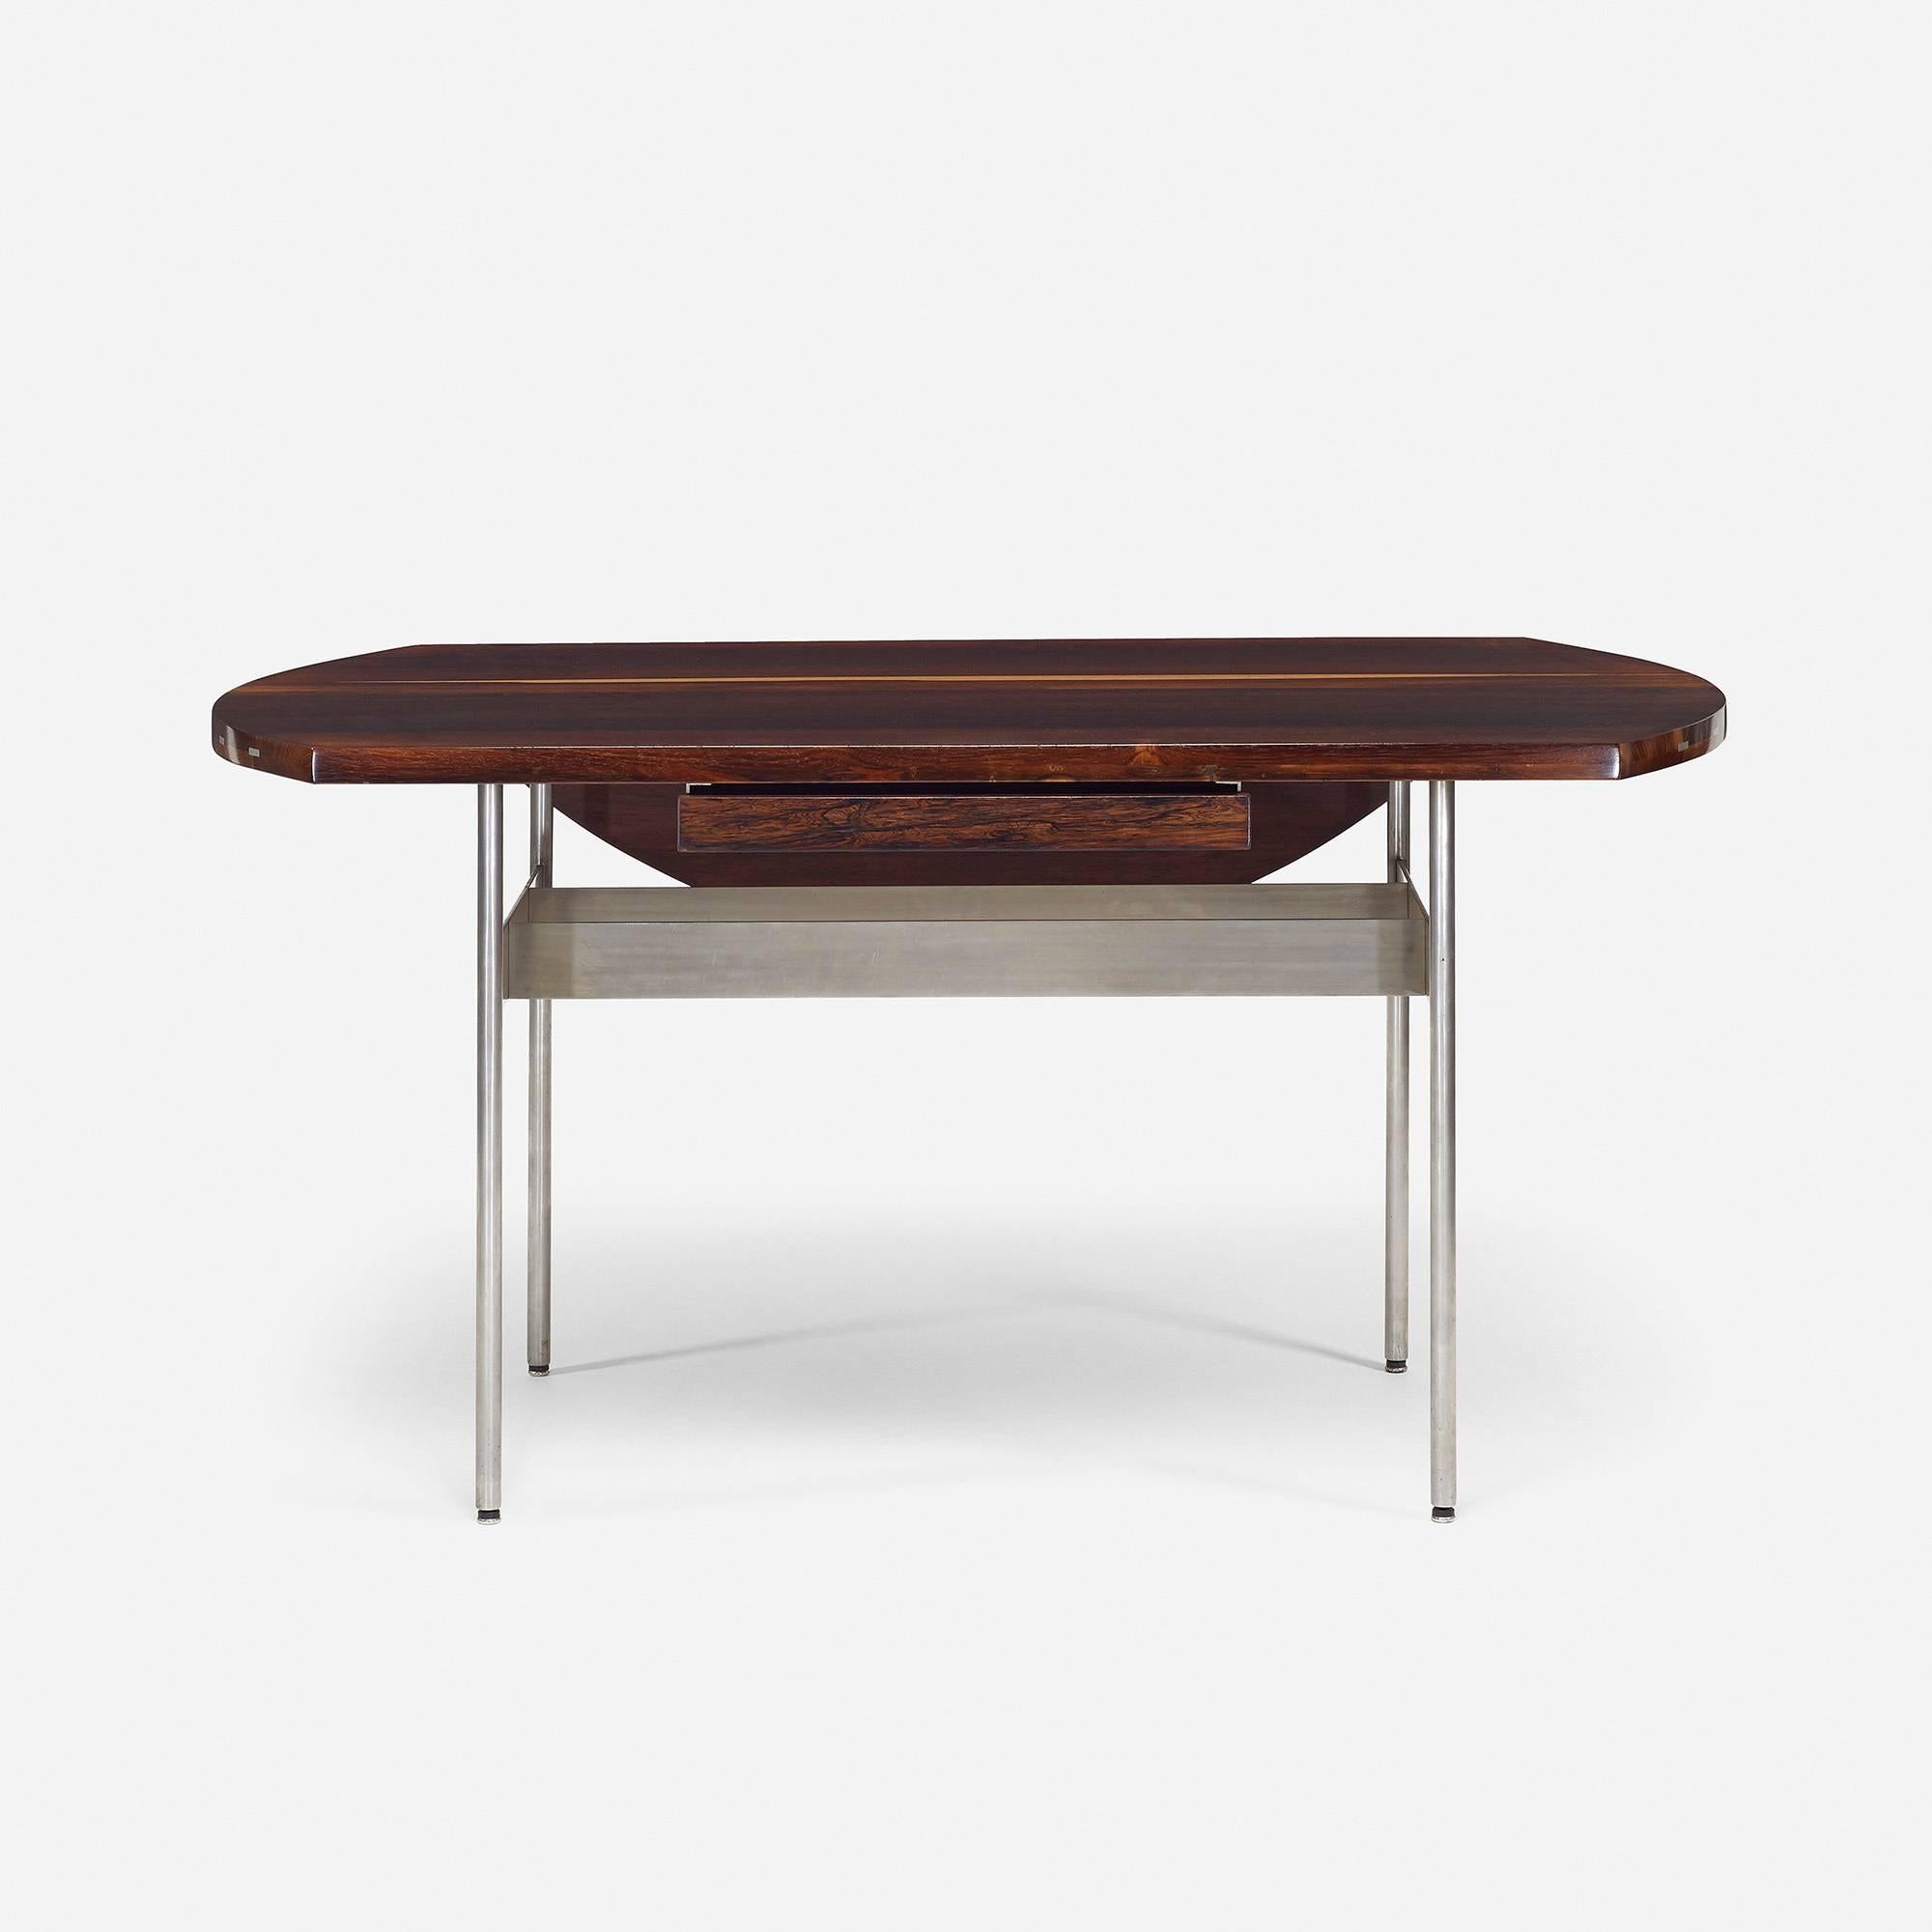 Desk features solid rosewood throughout including secondary woods - inset aluminum splines in desk top with aluminum legs and stretcher. Desk features a single drawer and drop-leaf writing surface. Desk measures: 60 W x 47.75 D x 28.5 inches when